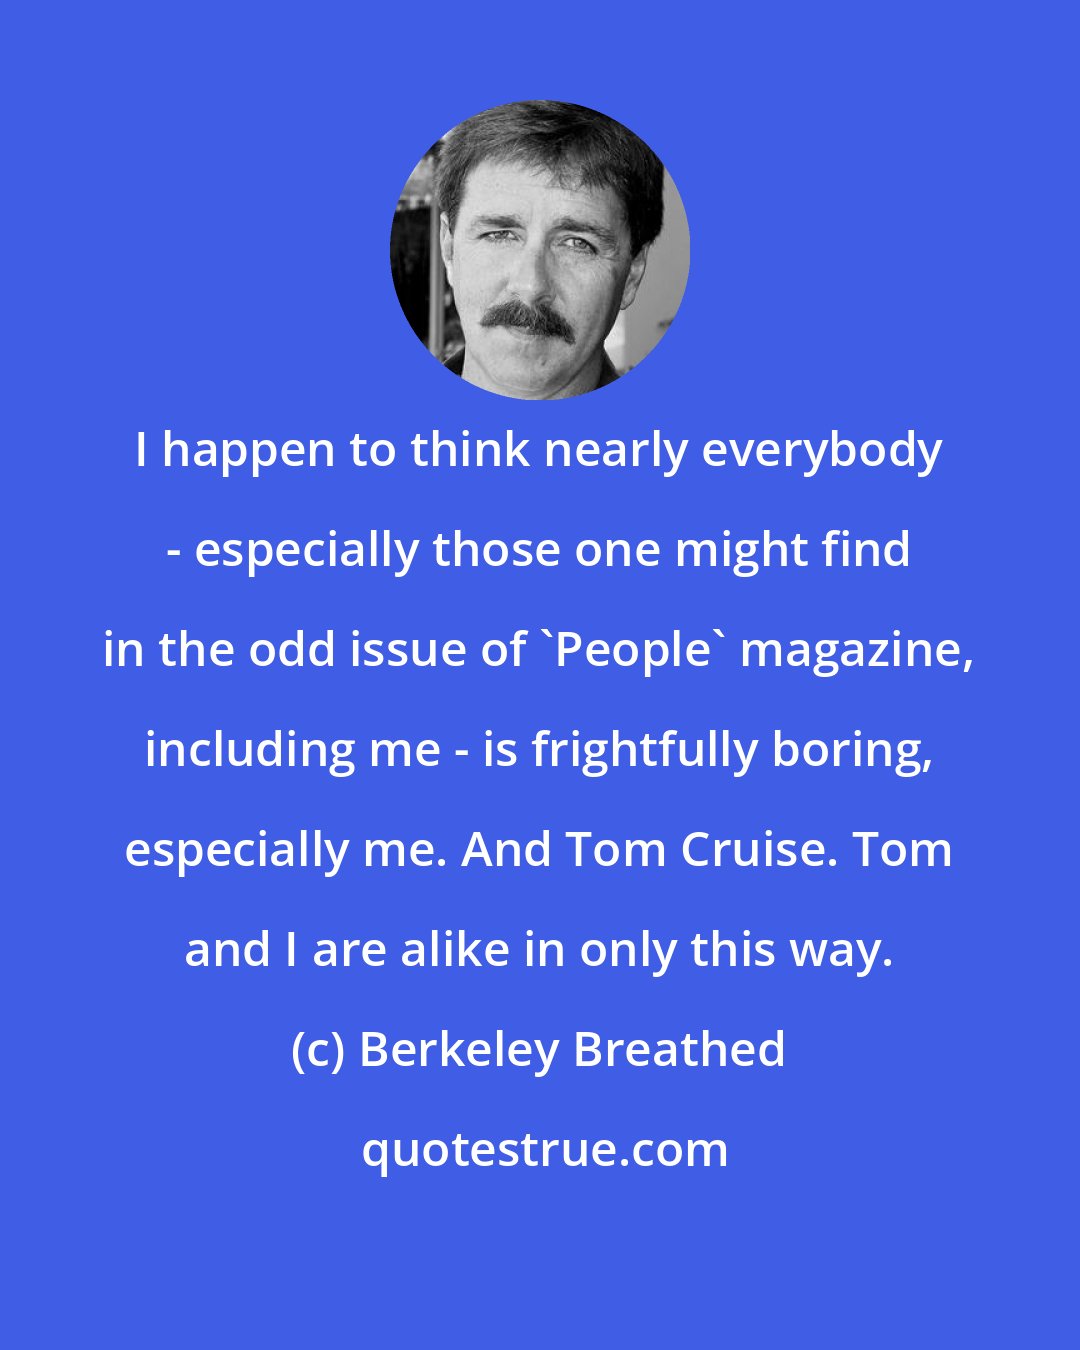 Berkeley Breathed: I happen to think nearly everybody - especially those one might find in the odd issue of 'People' magazine, including me - is frightfully boring, especially me. And Tom Cruise. Tom and I are alike in only this way.